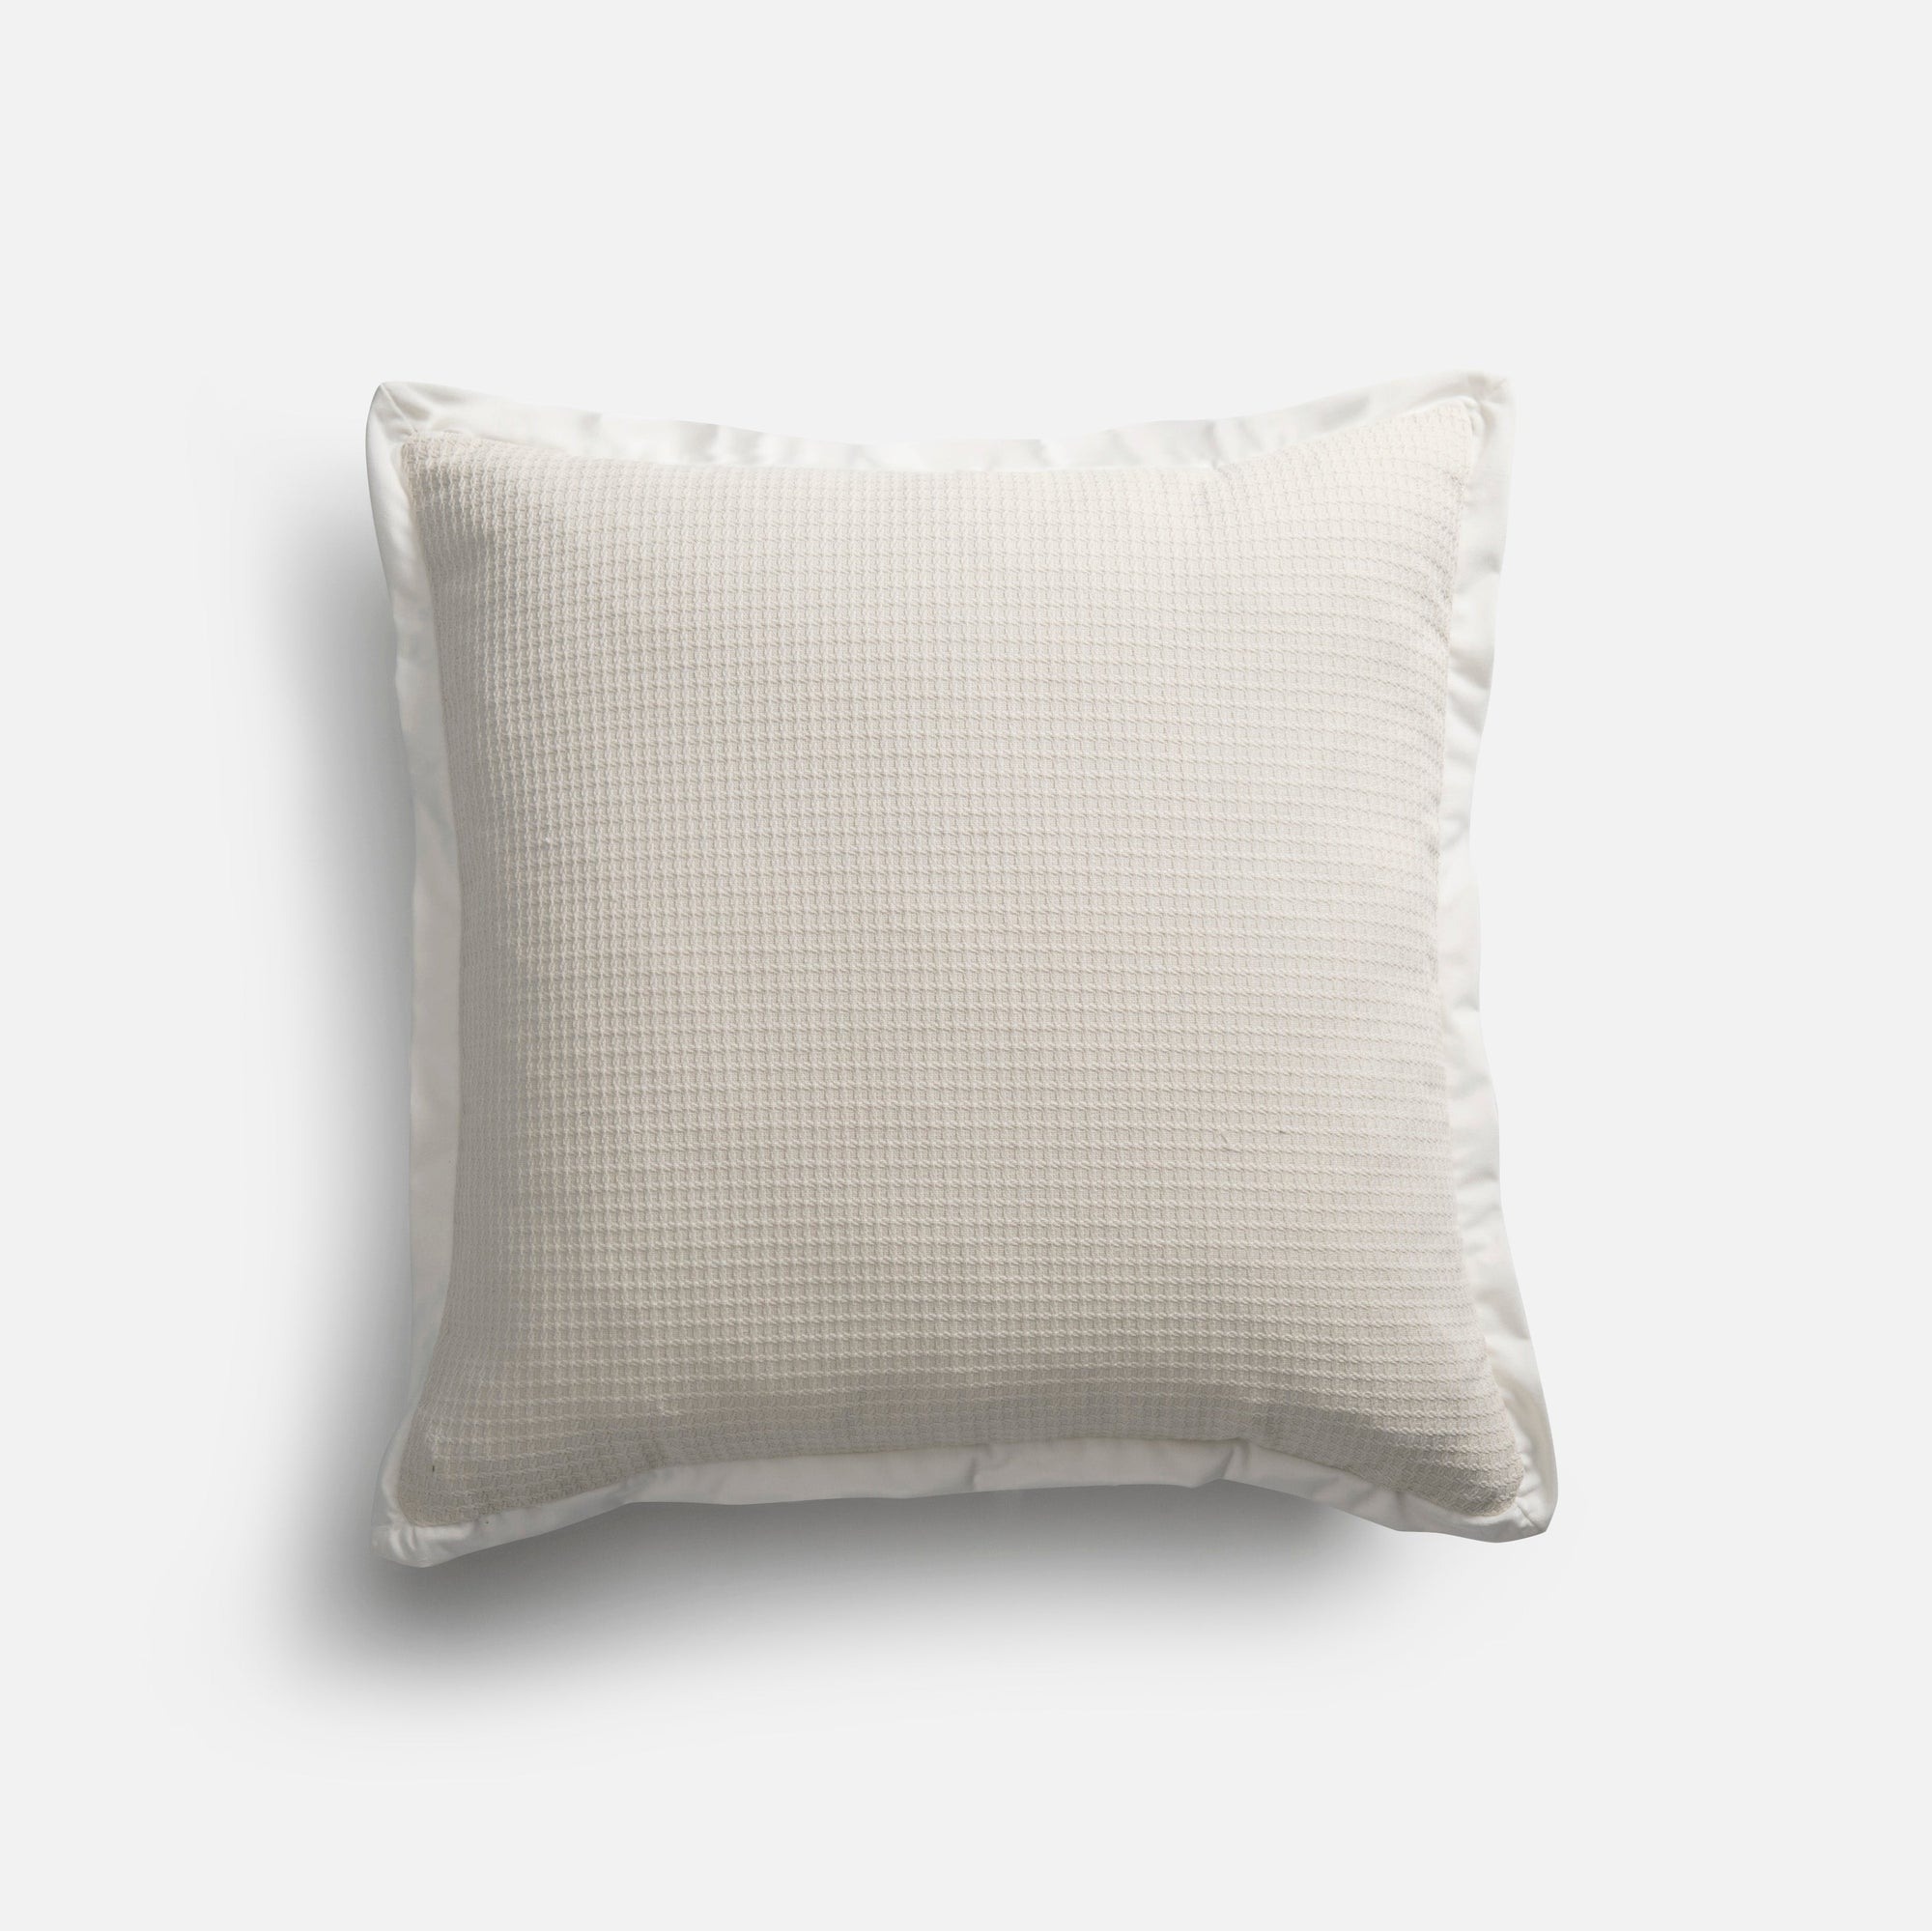 Cicely Cushion - The Finishing Store South Africa